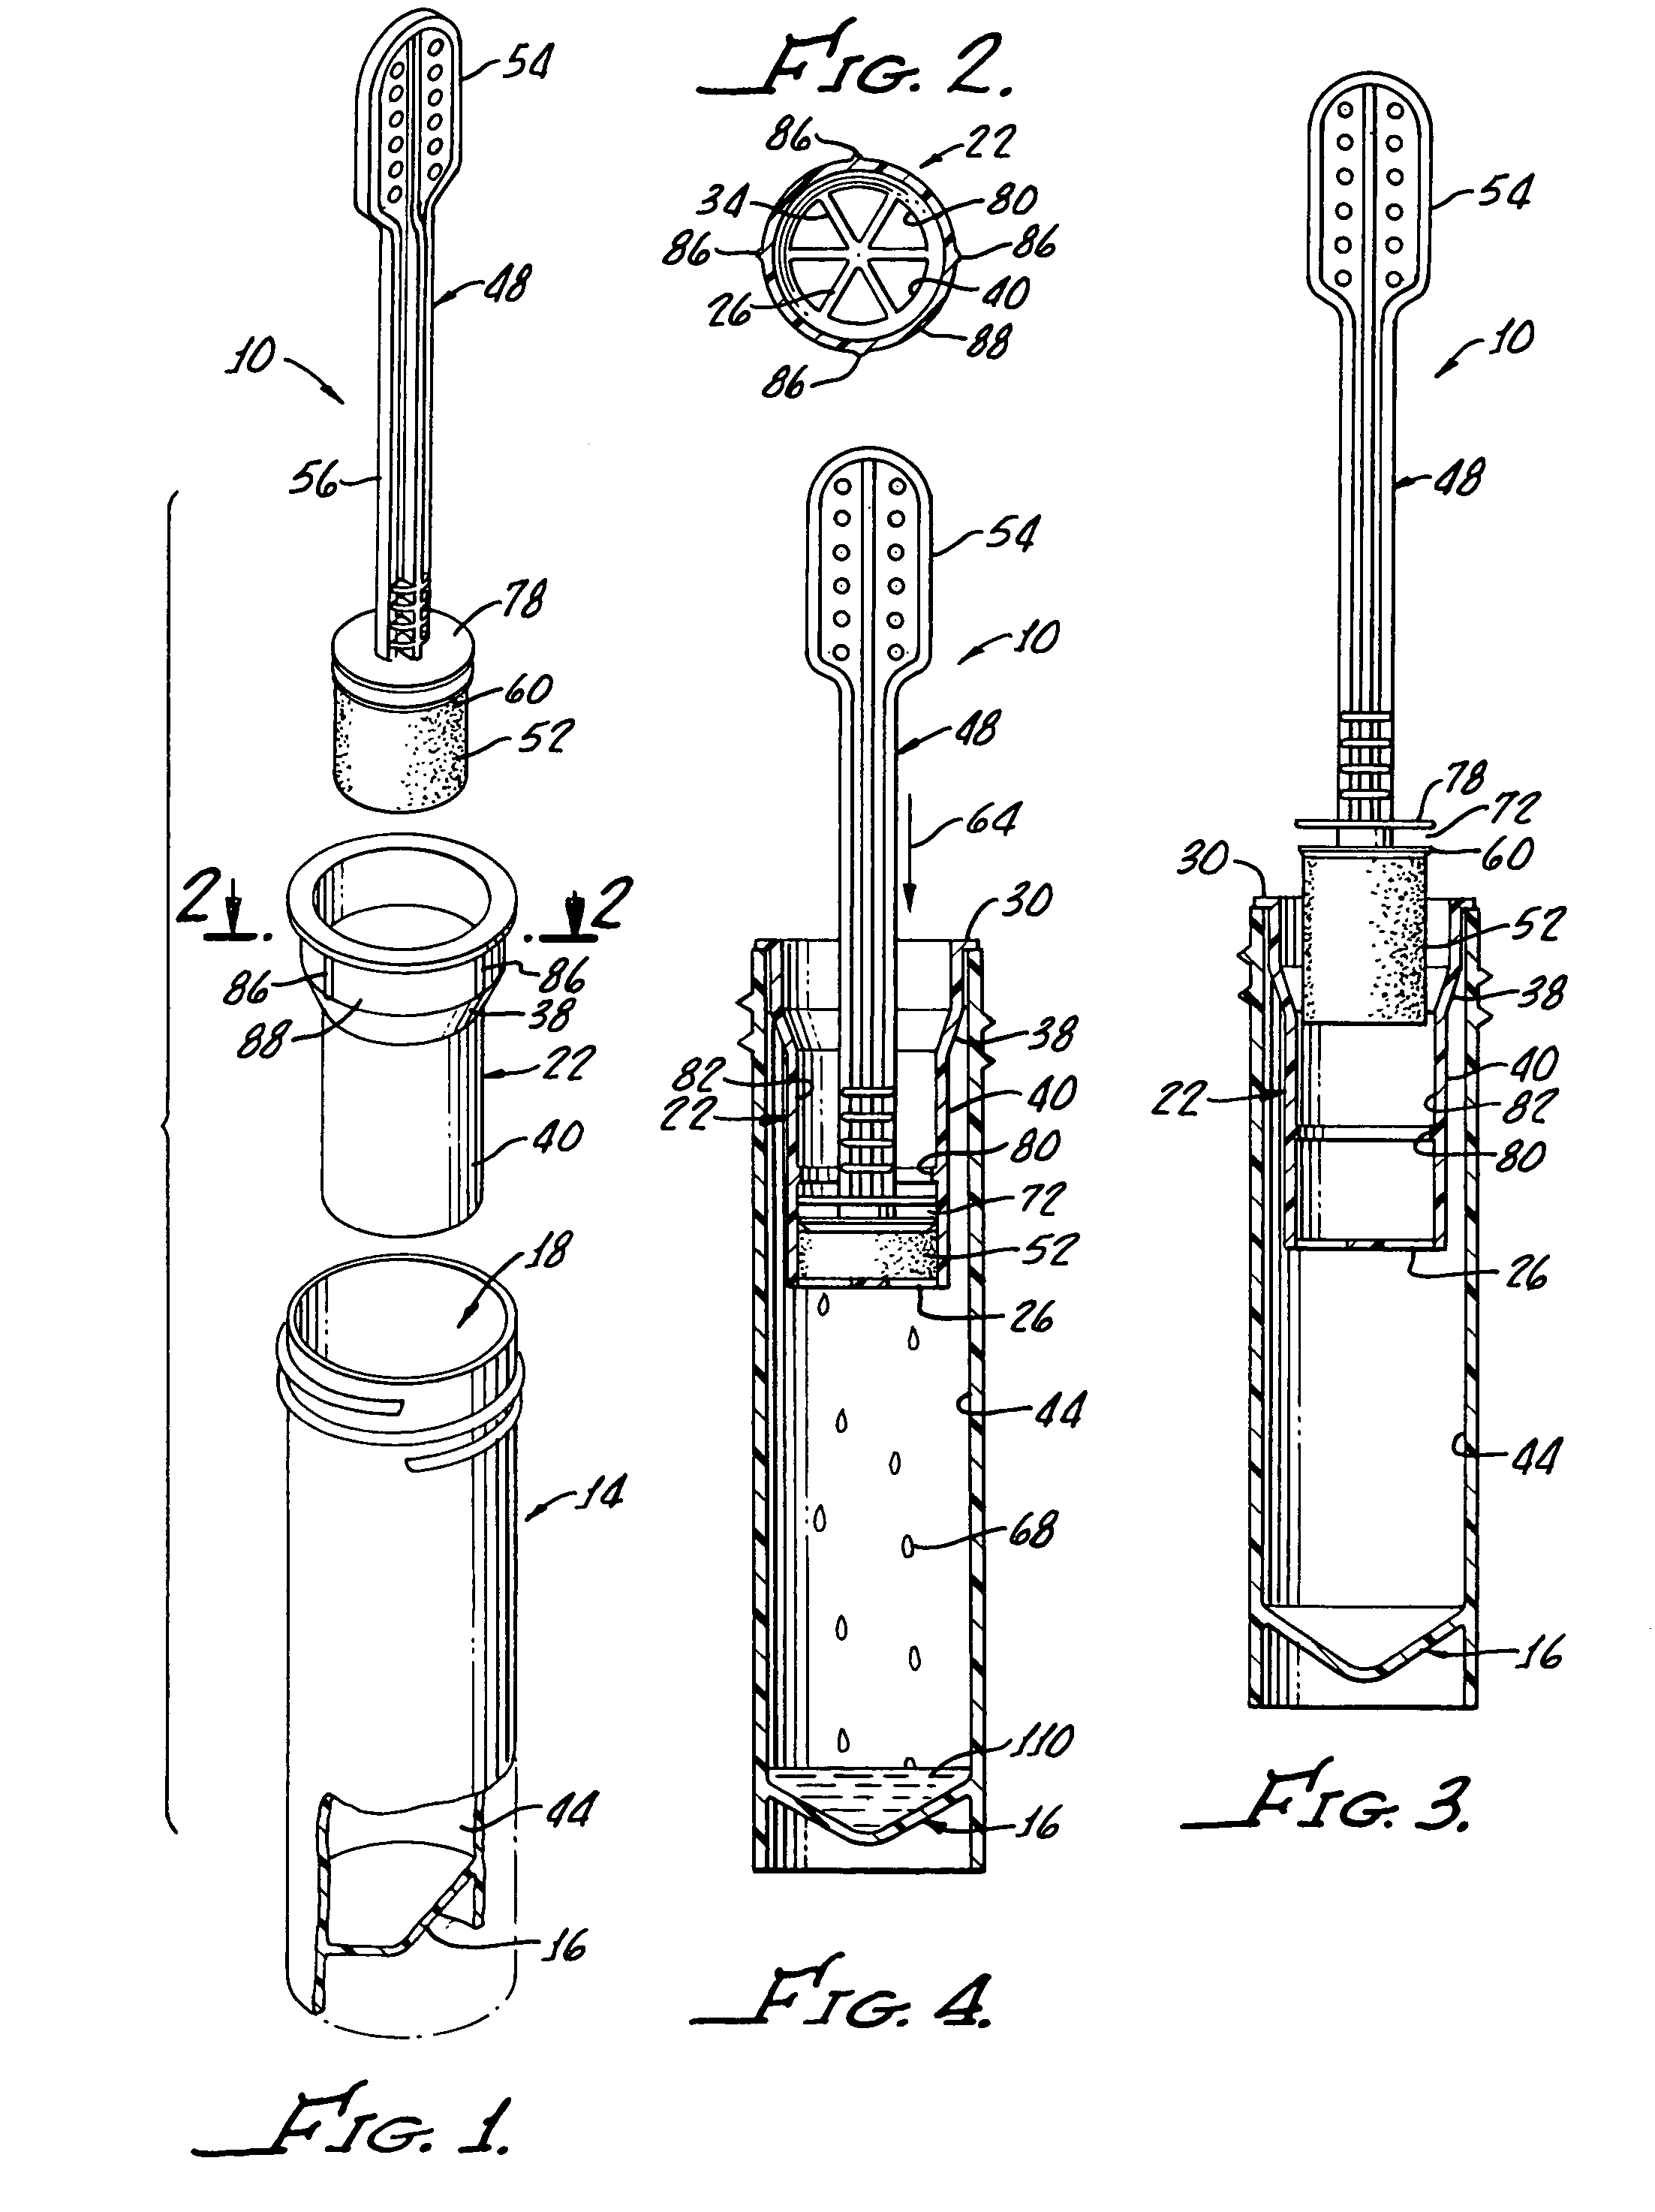 Fluid collection and testing device